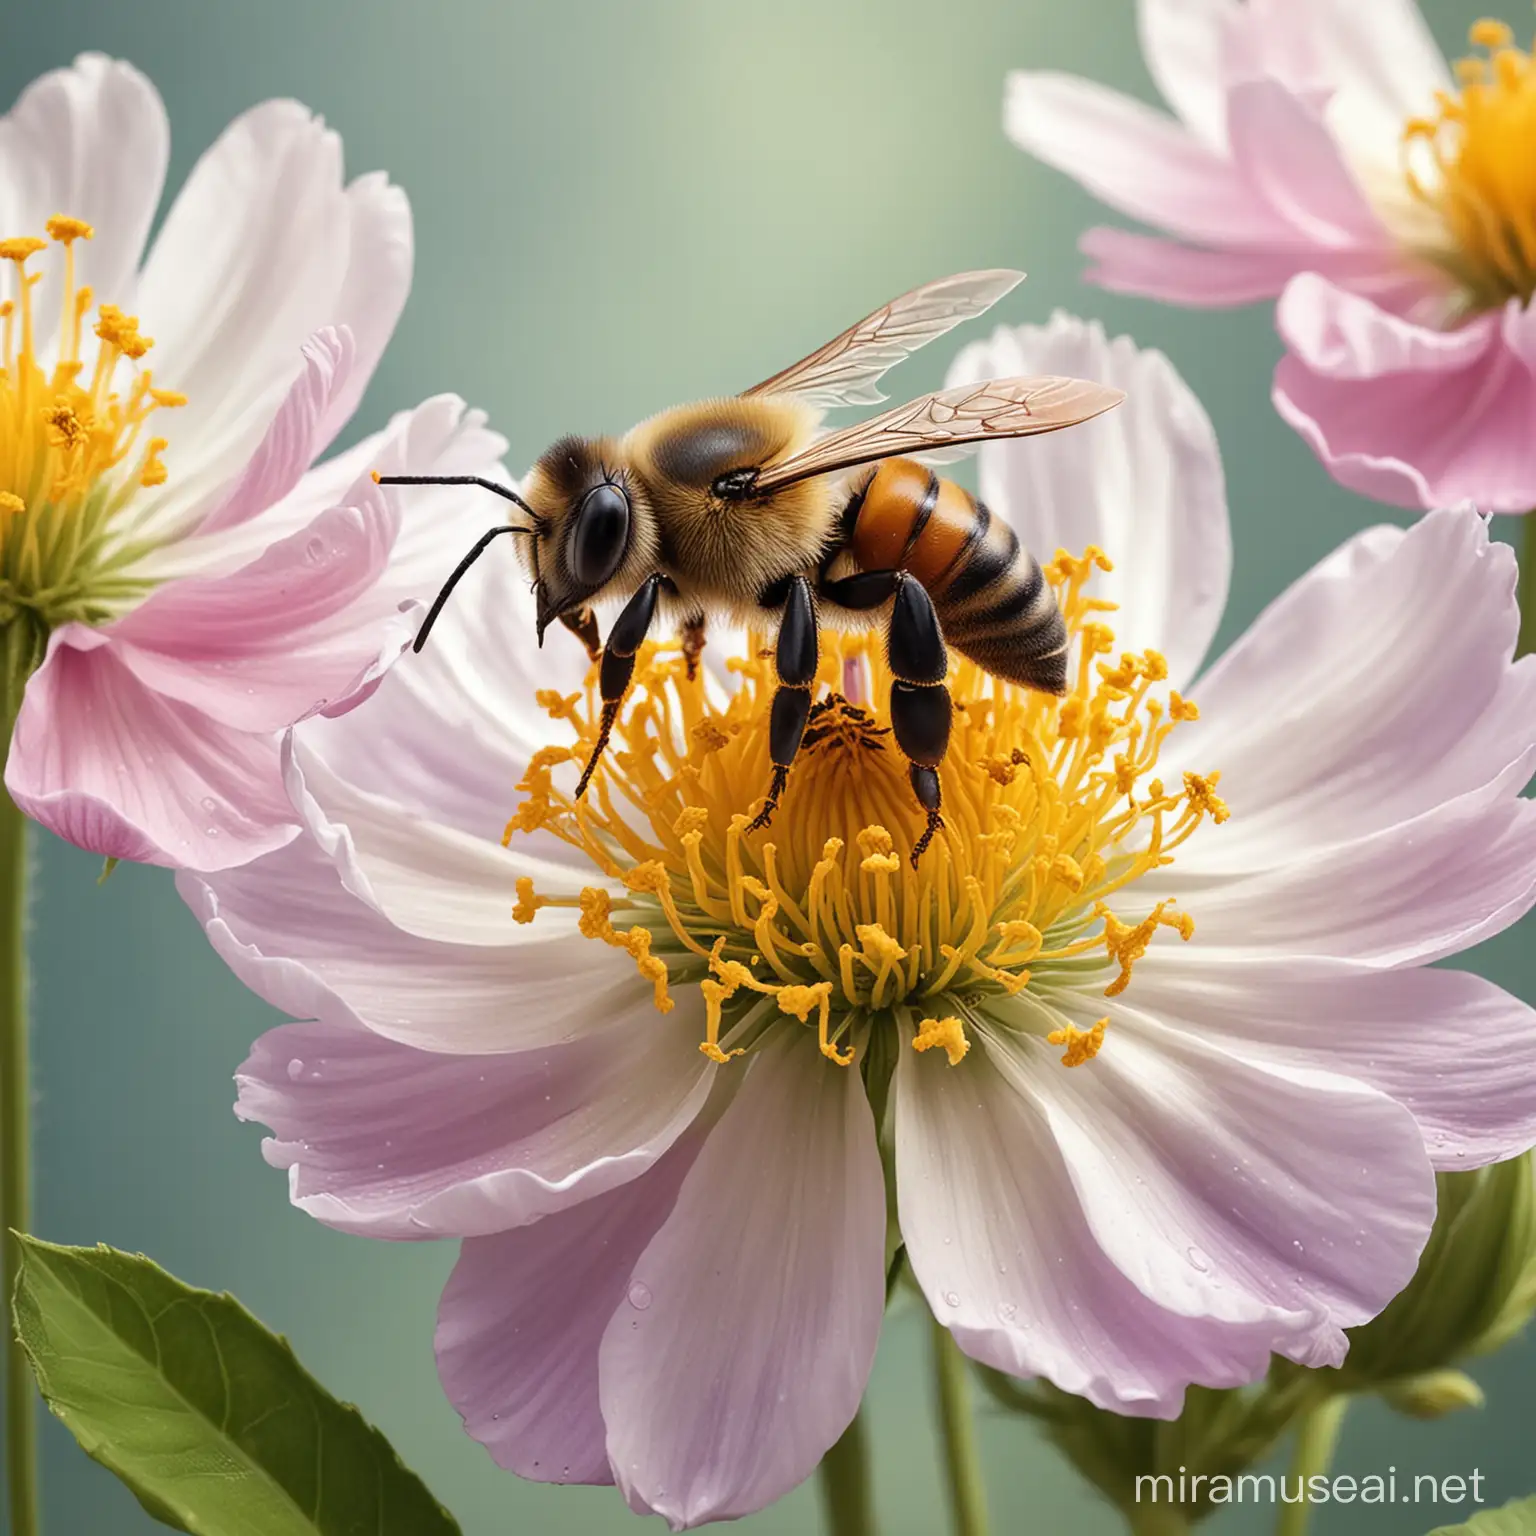 A bee collecting pollen from a flower, realistic art